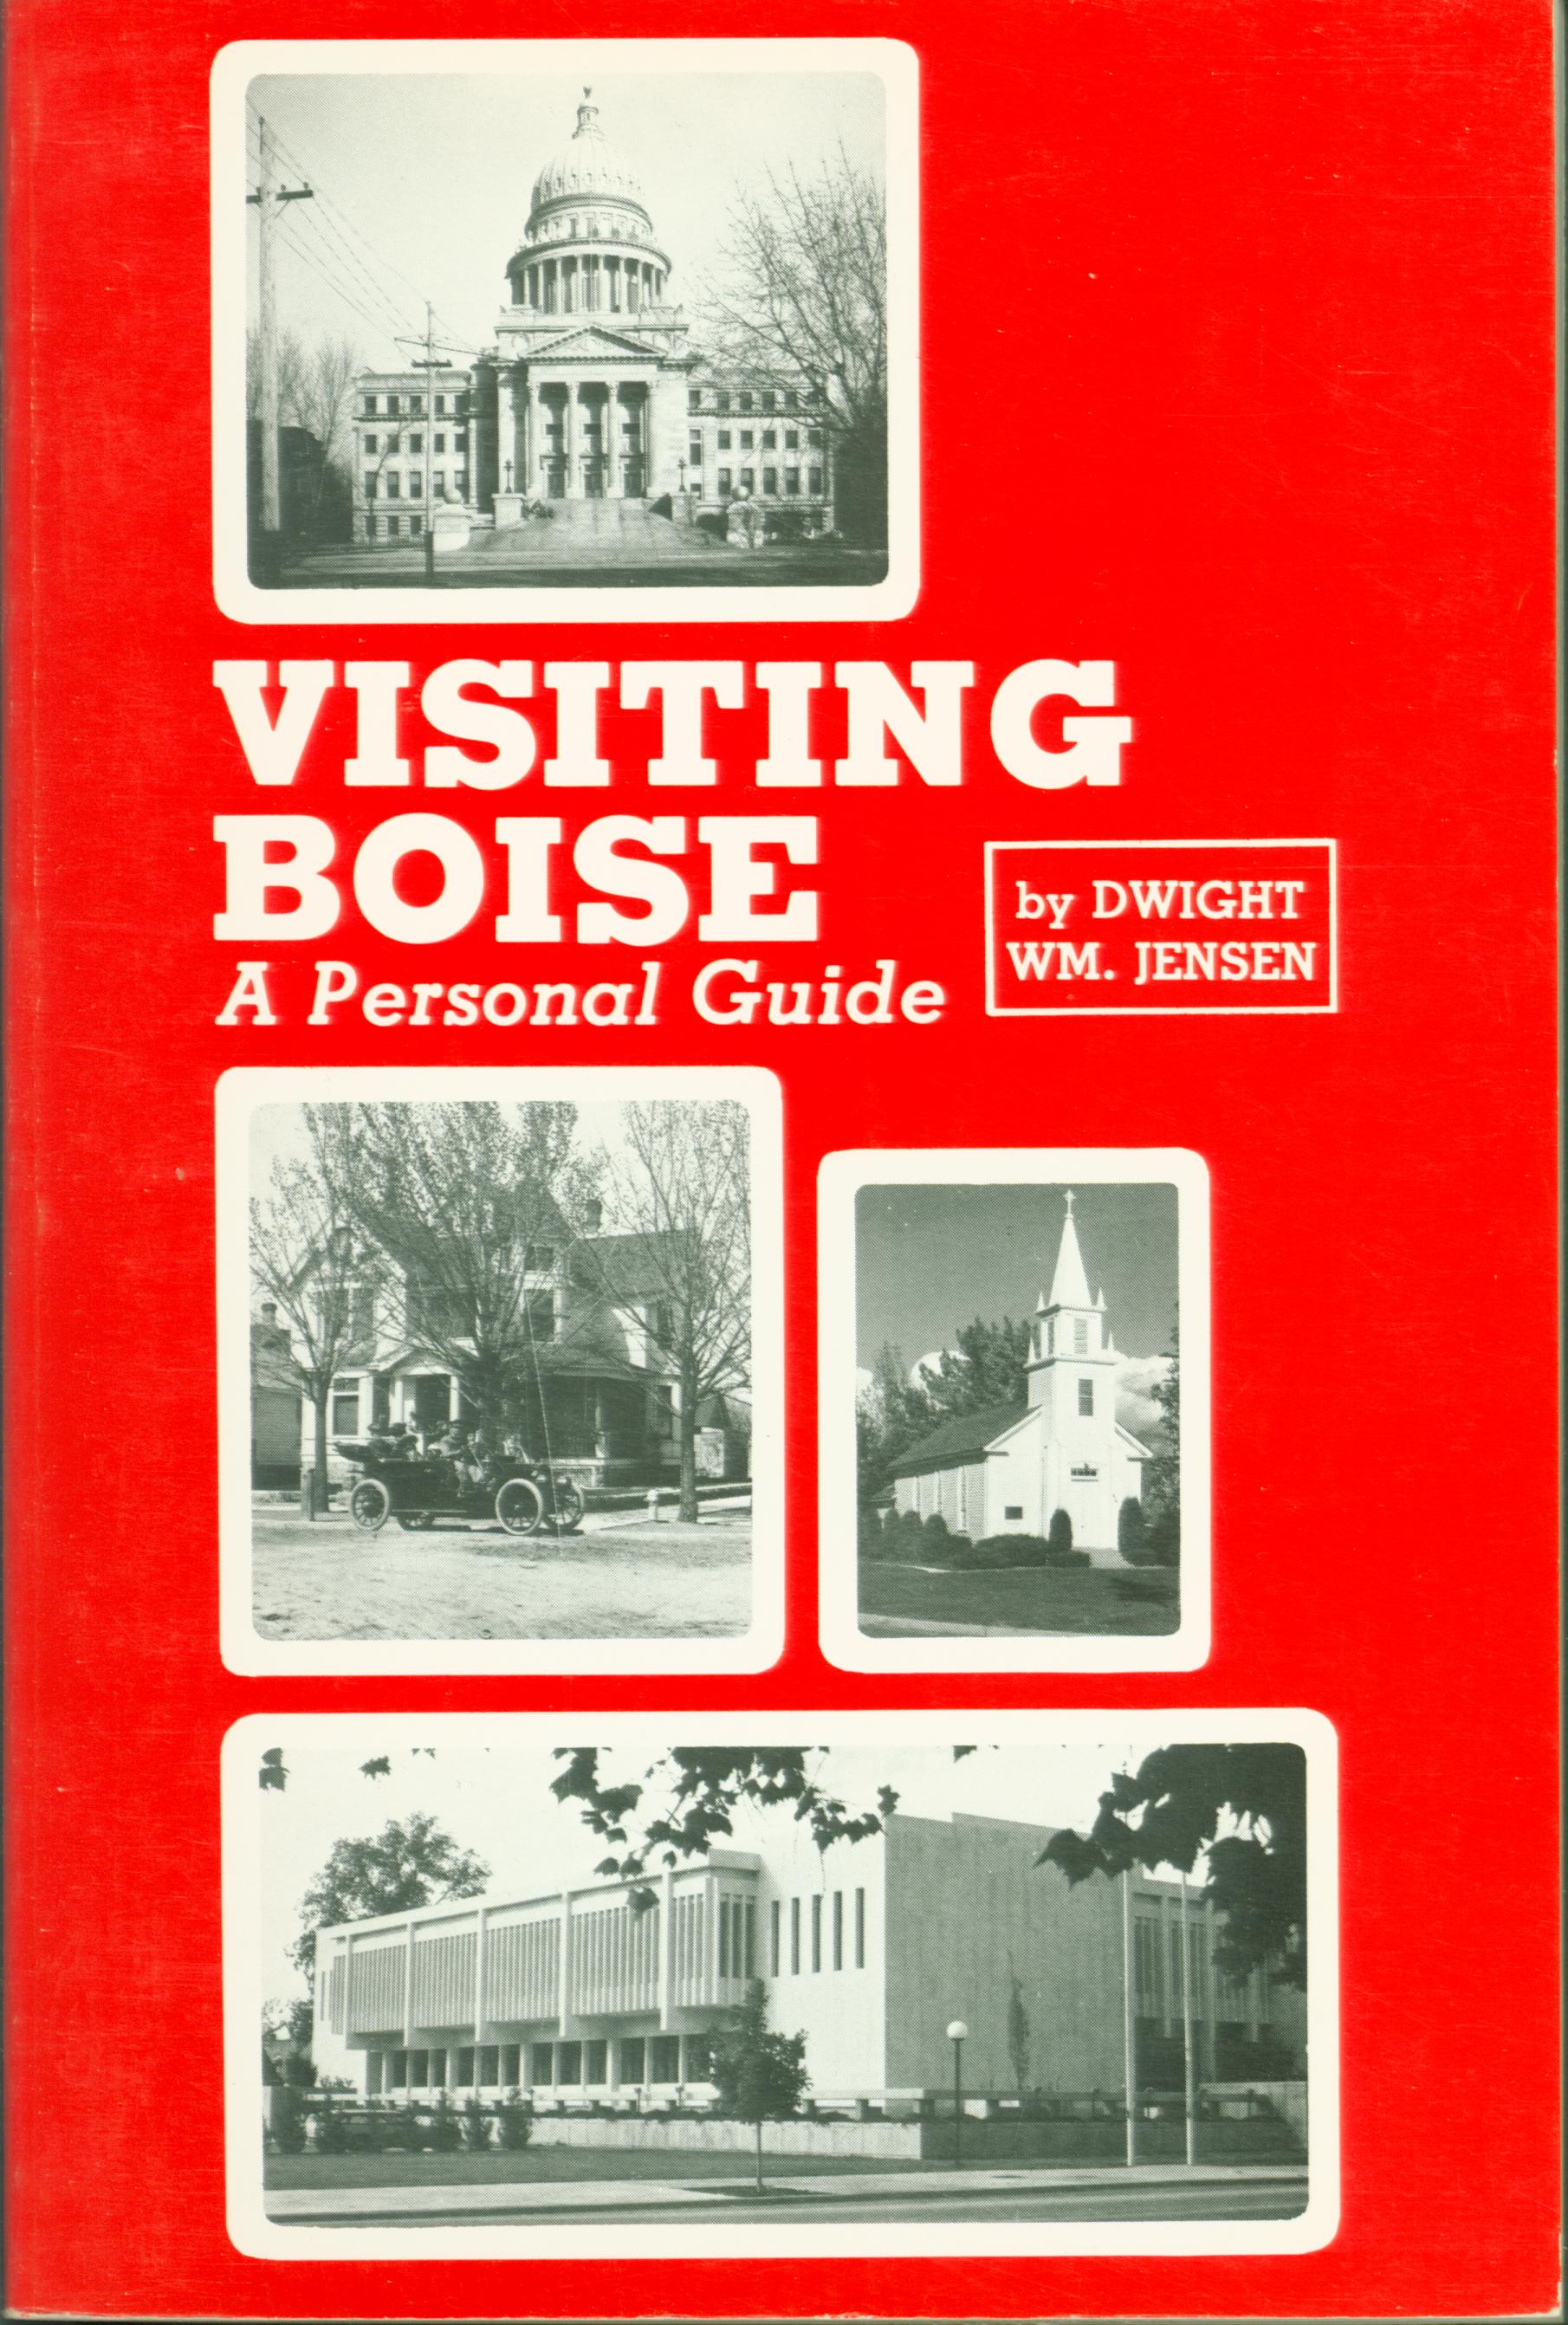 VISITING BOISE: a personal guide.